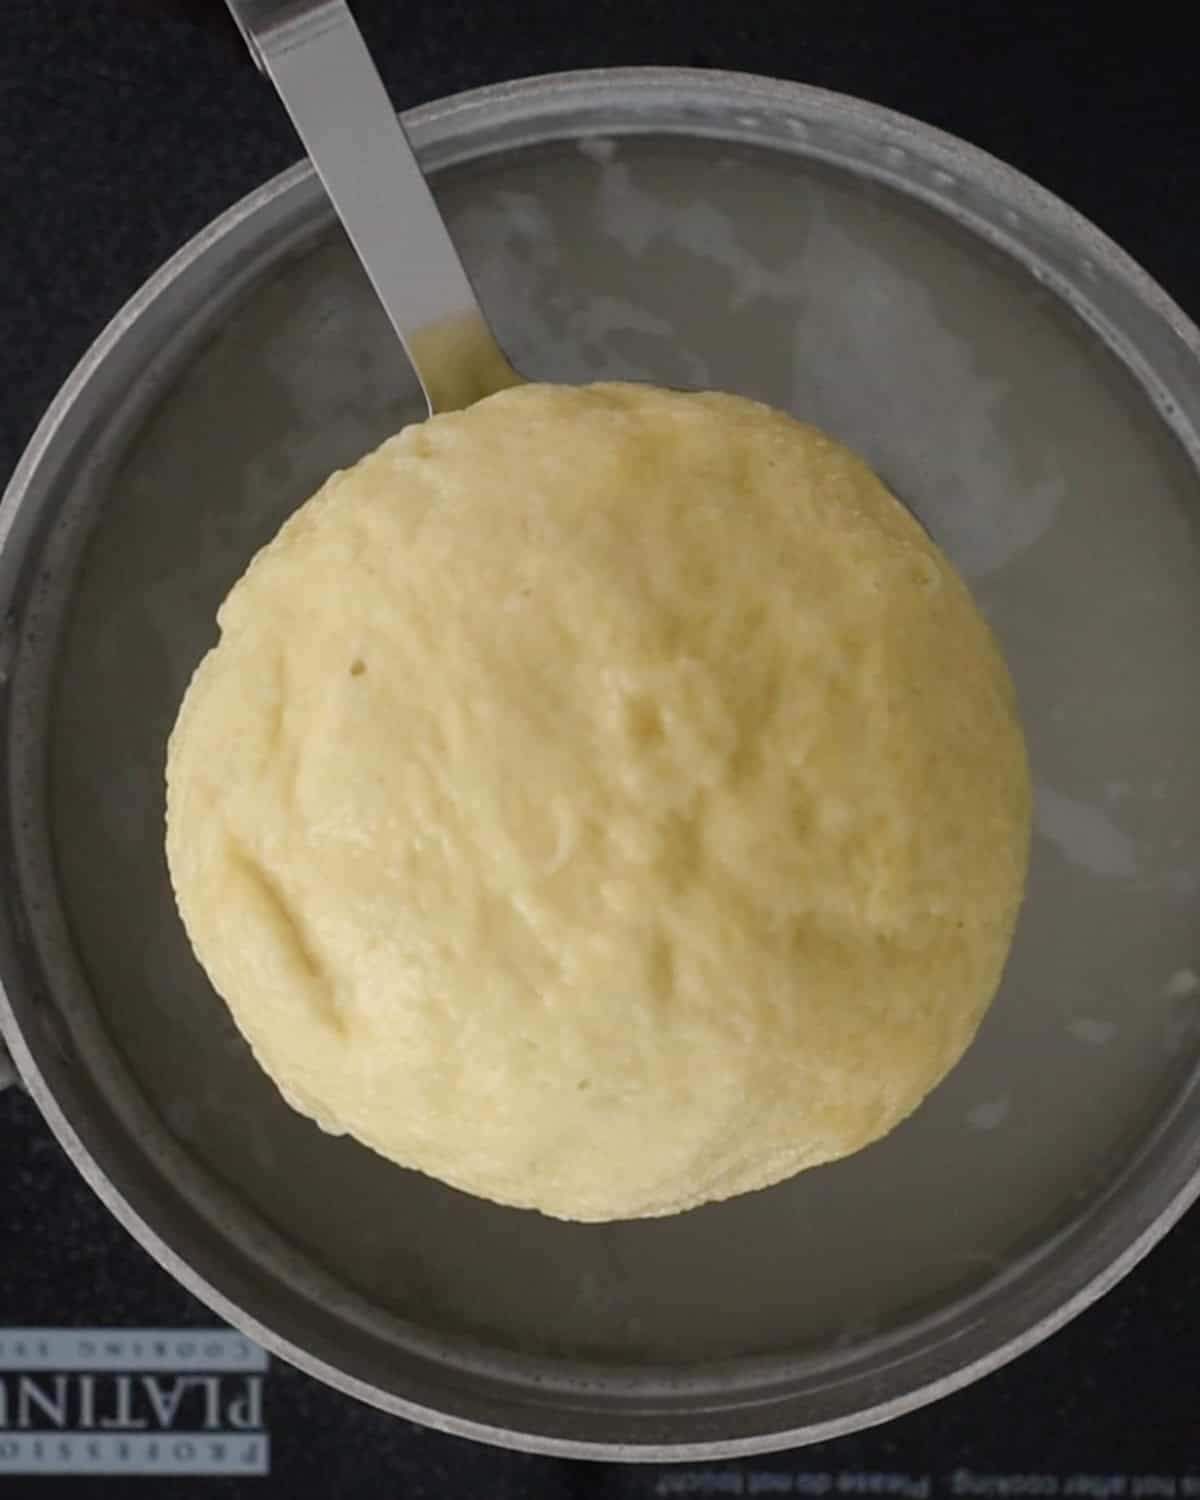 How to Make Pretzel Bread  - dough being removed from a baking soda water bath